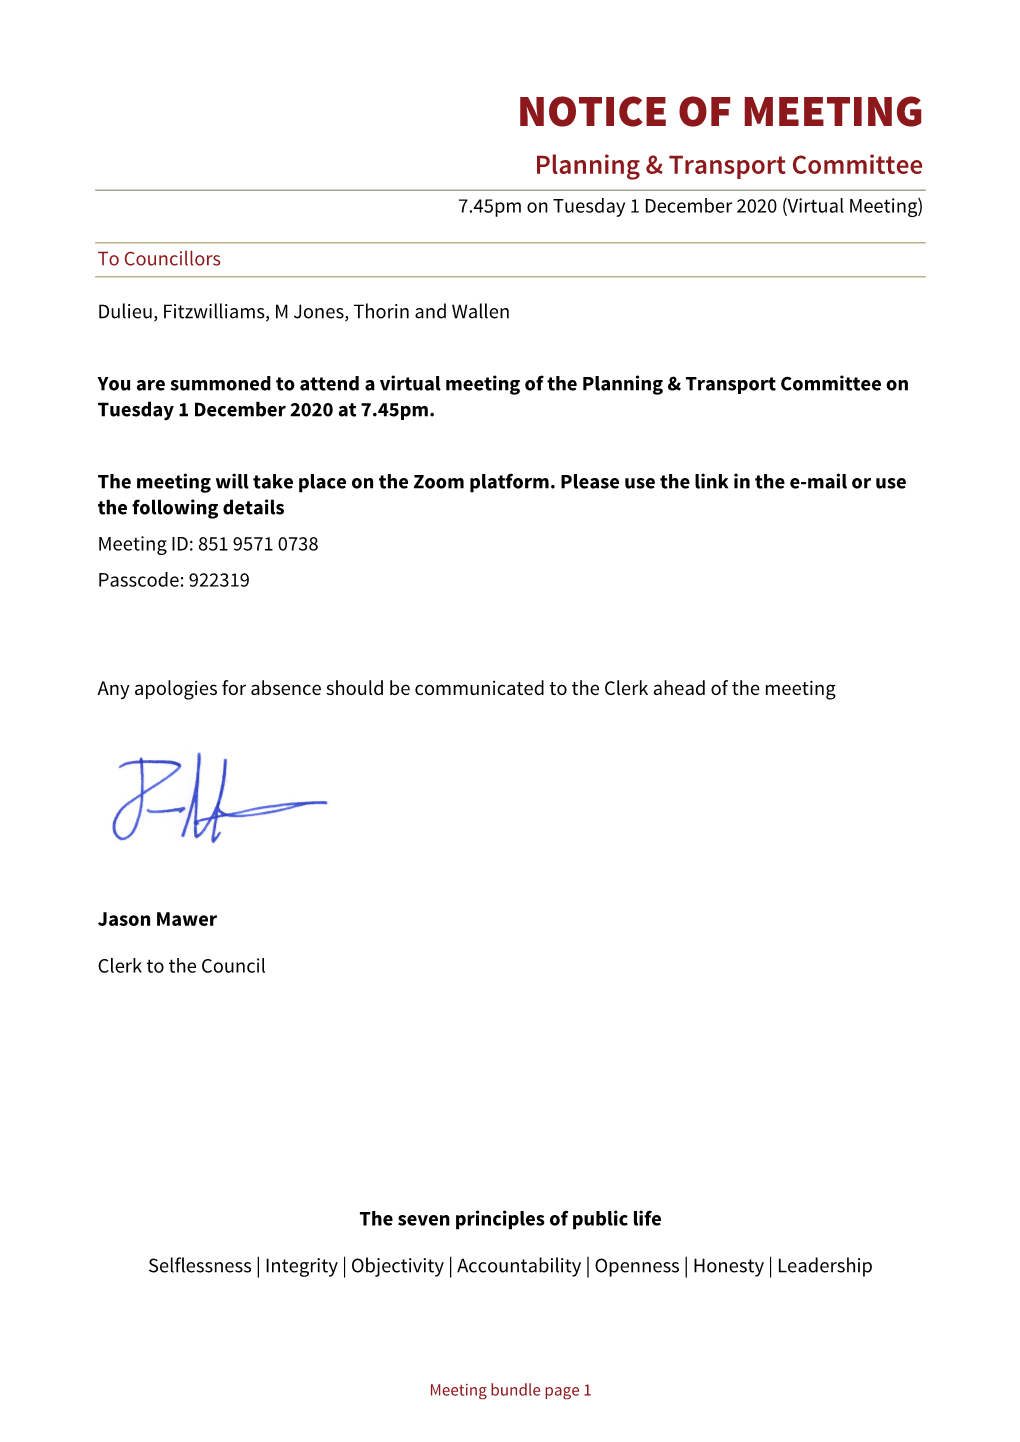 NOTICE of MEETING Planning & Transport Committee 7.45Pm on Tuesday 1 December 2020 (Virtual Meeting)